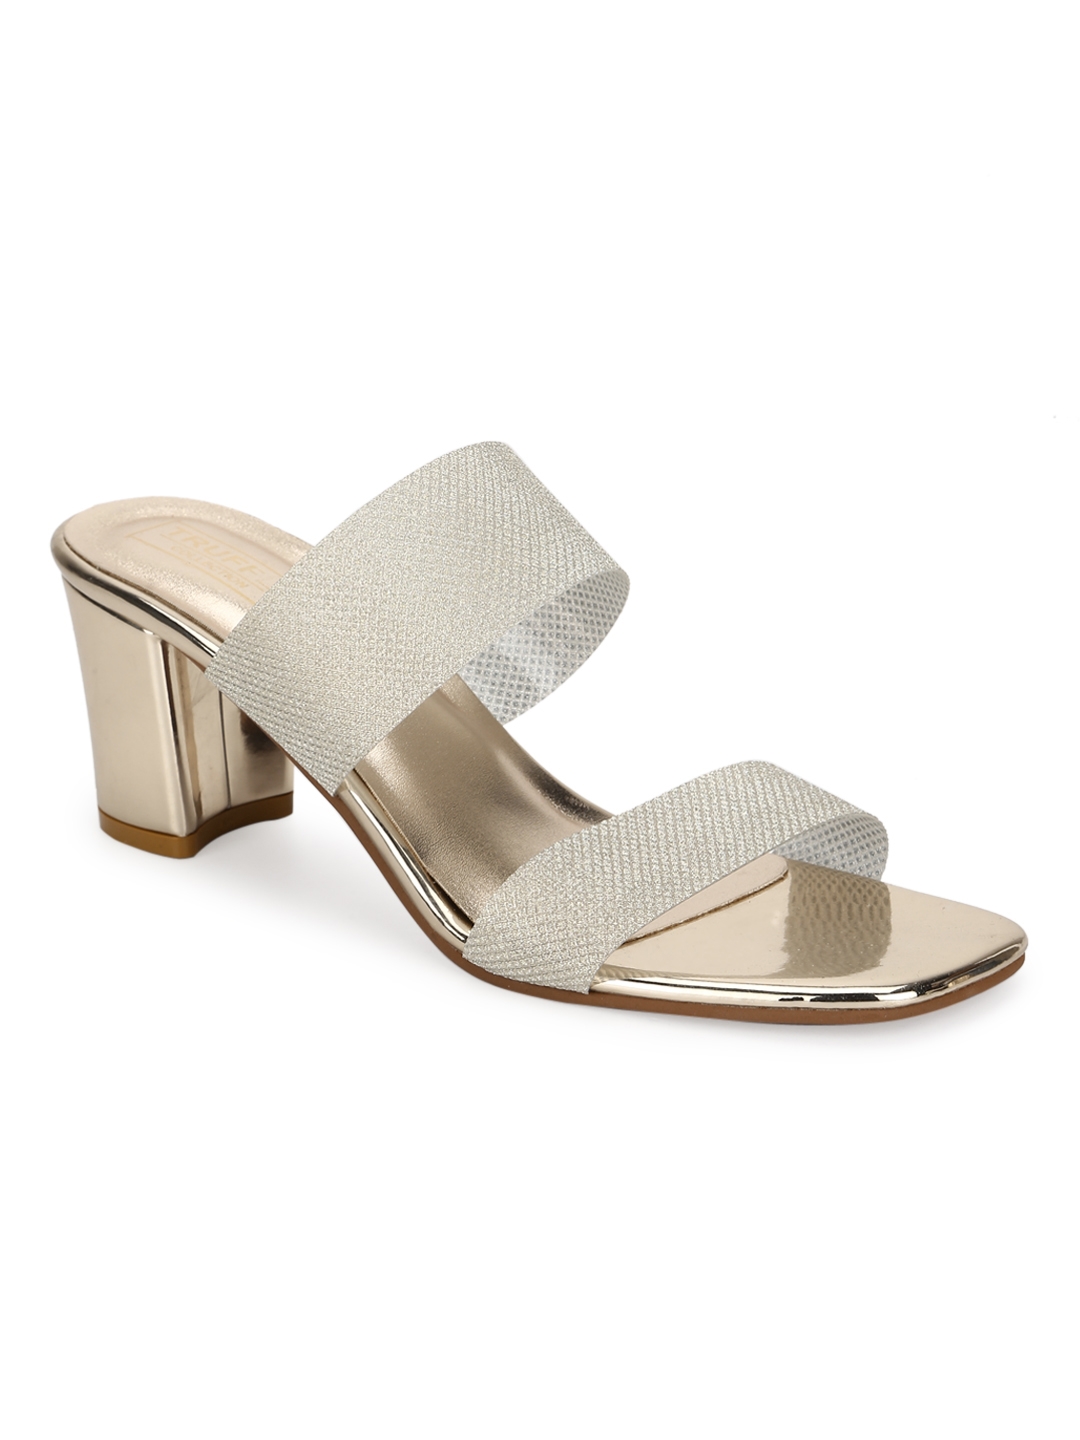 Truffle Collection | Gold PU Block Heels Mules